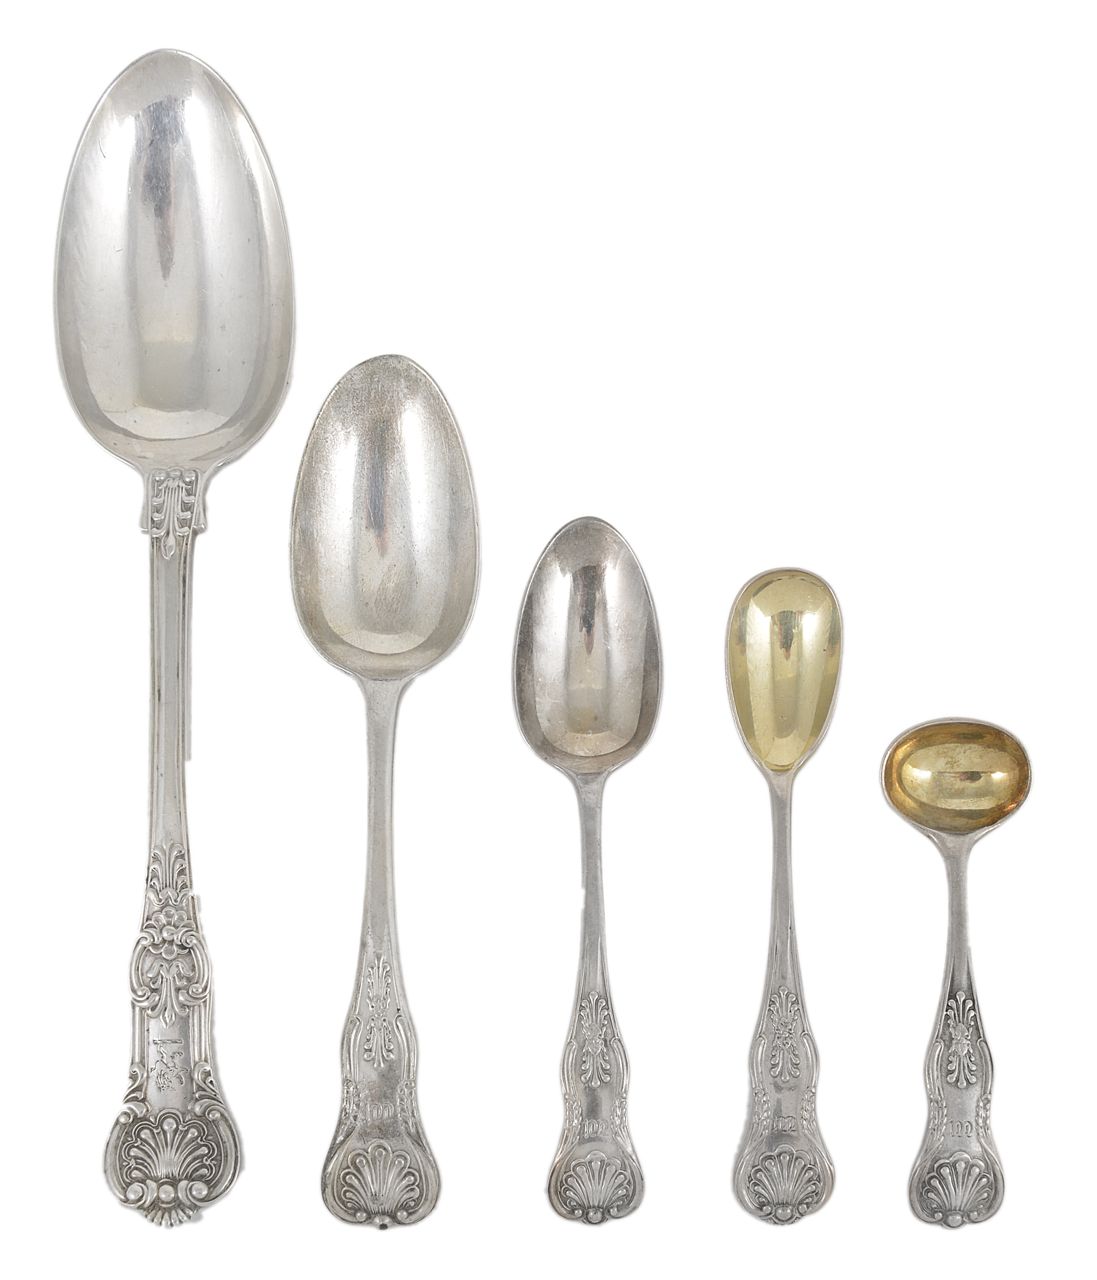 A quantity of silver serving, desert, and cruet spoons, hallmarks include London 1813, and makers